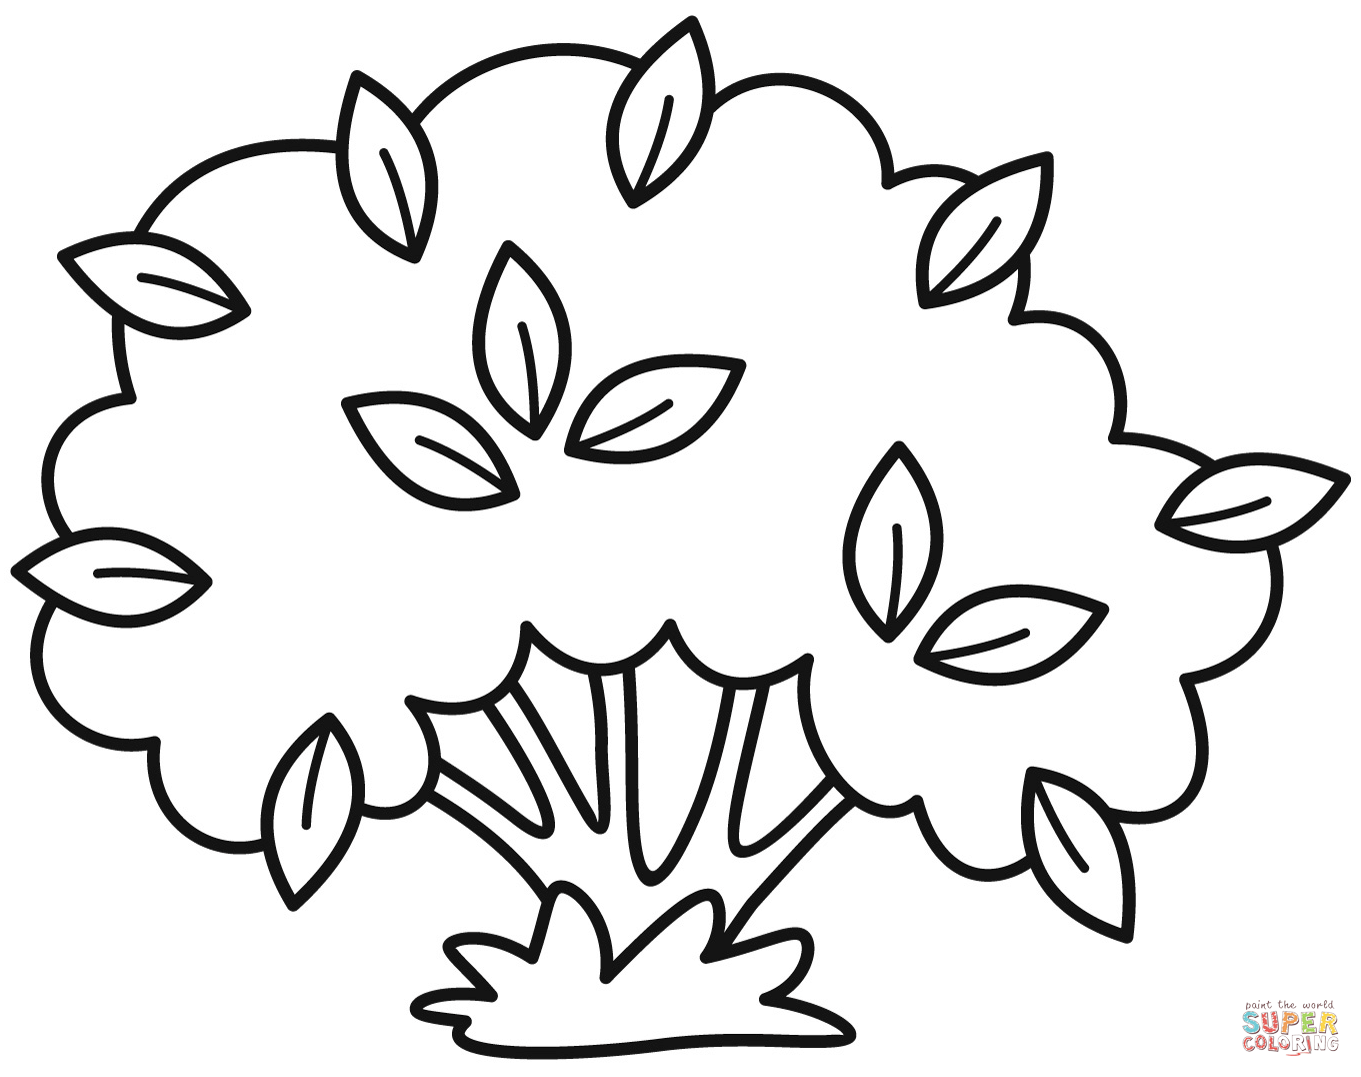 Bush coloring page | Free Printable Coloring Pages